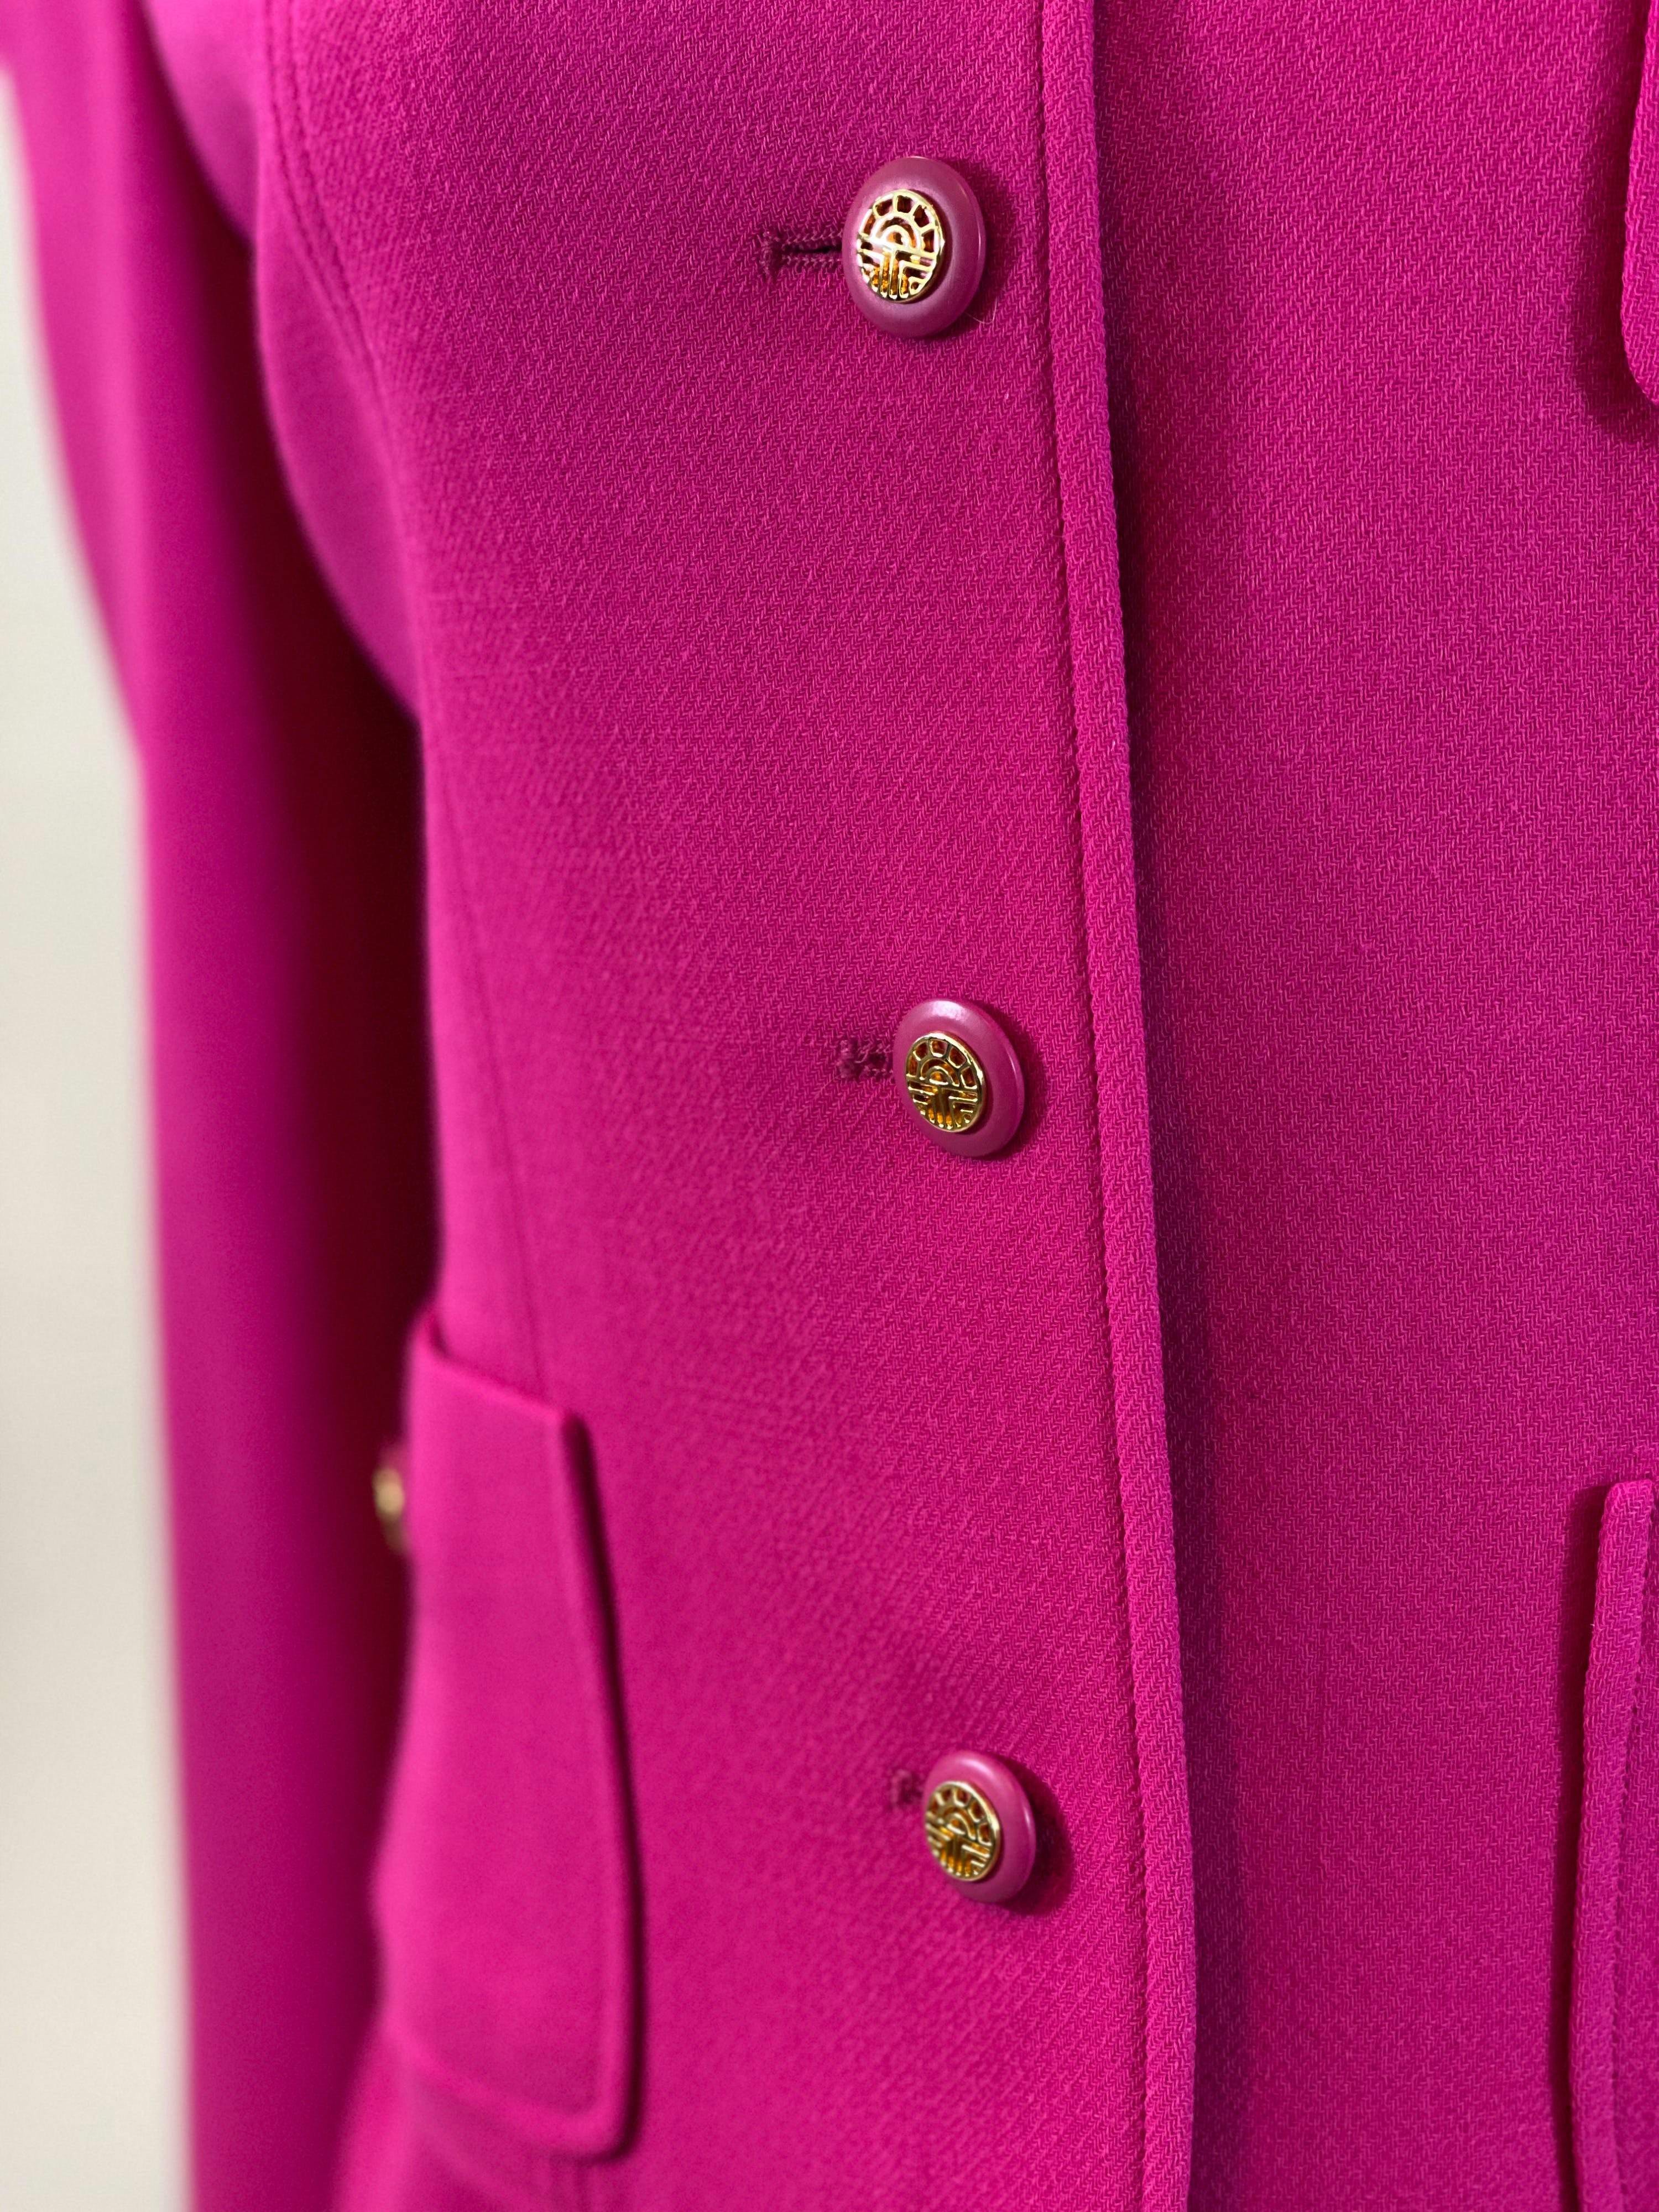 Vintage Hot Pink Skirt Suit by Louis Feraud | Shop THRILLING